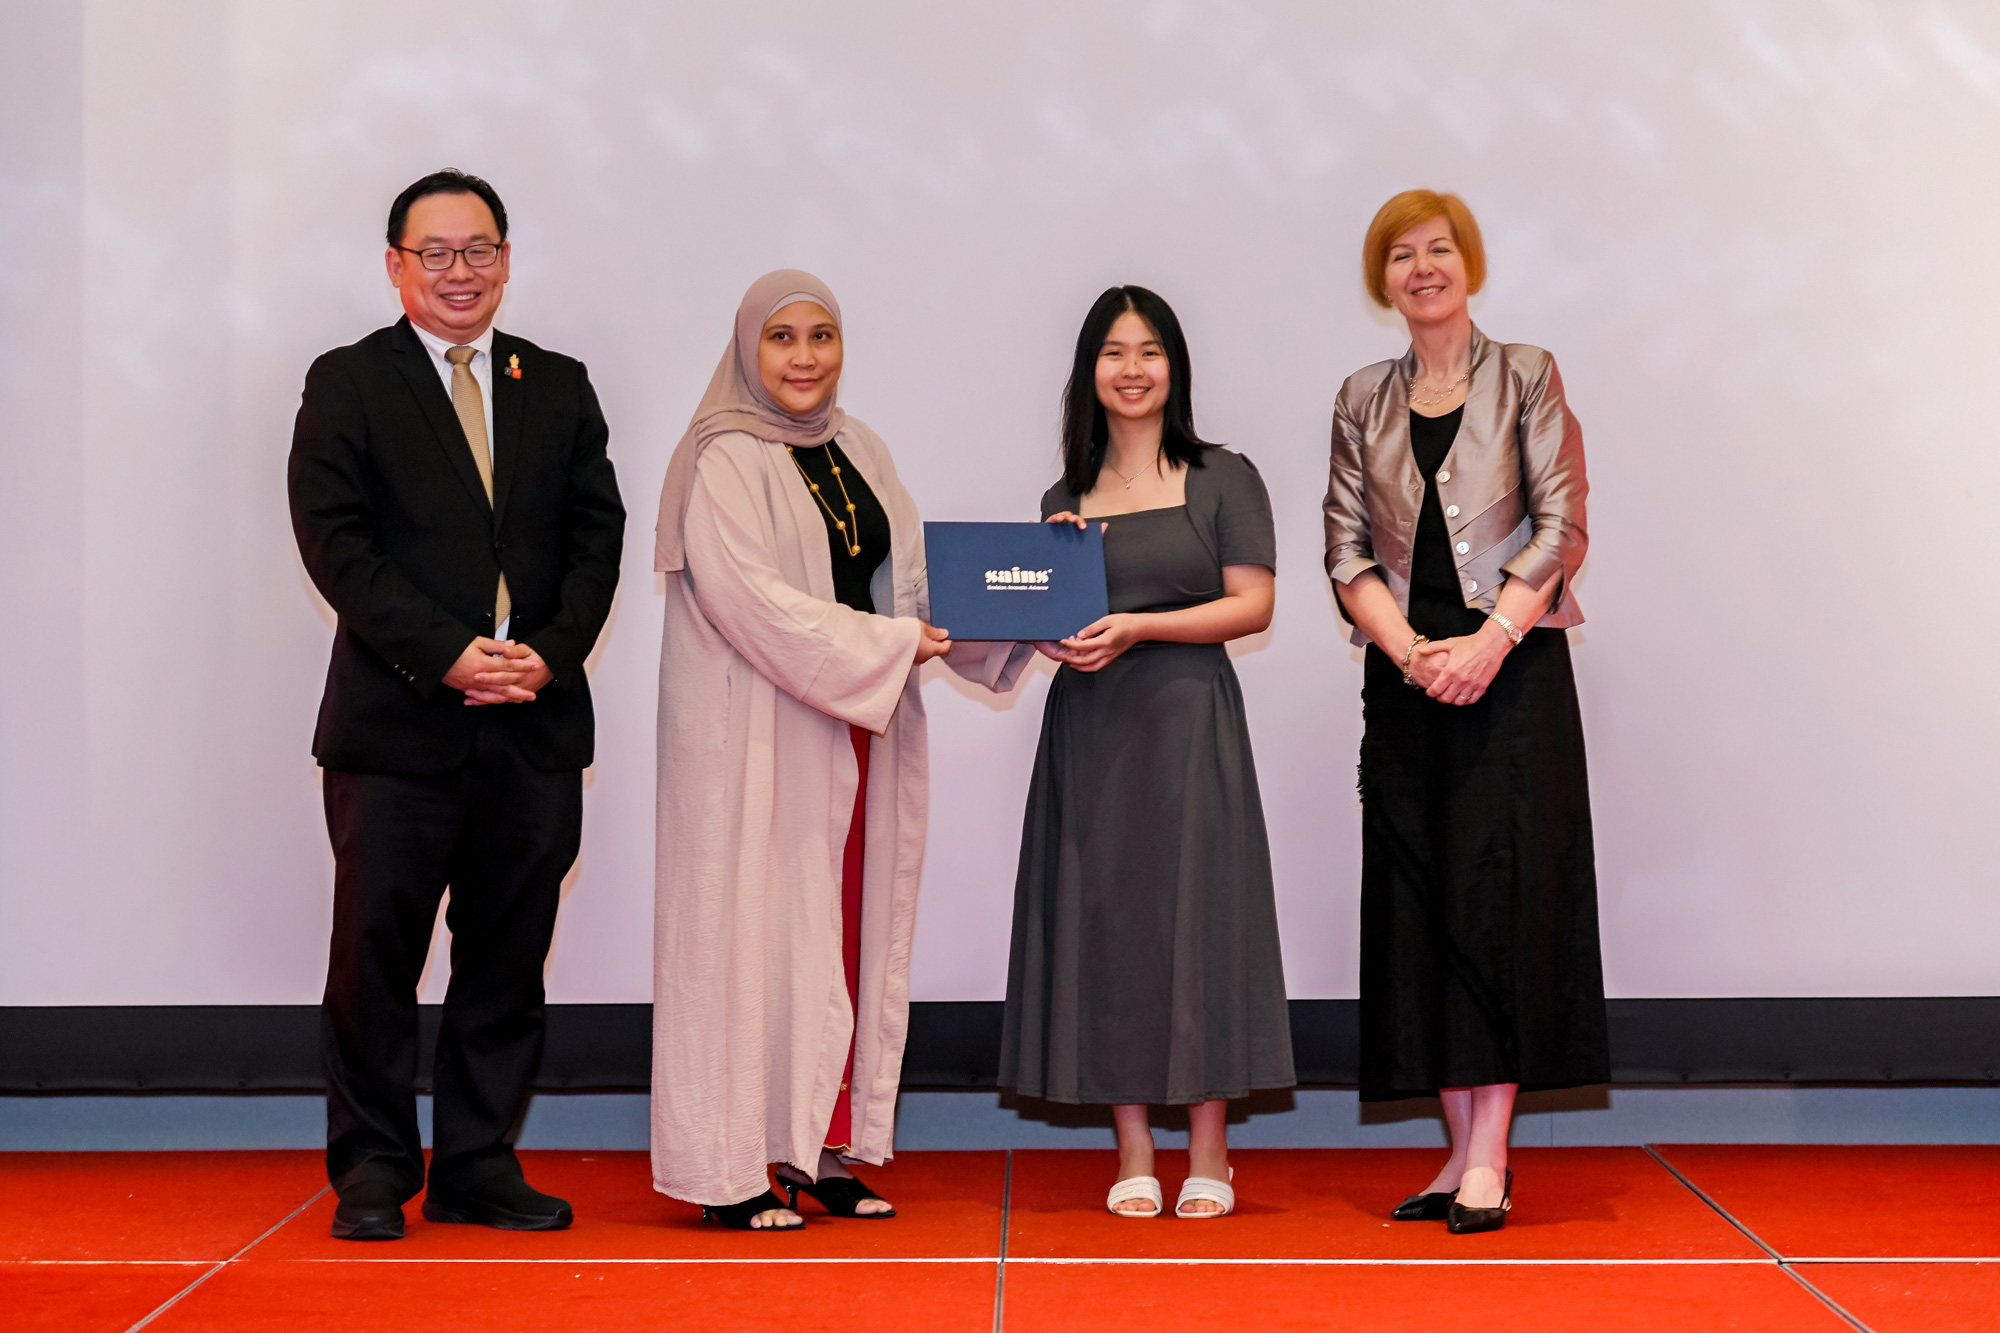 Rachel Soon (second right) receives the Best Graduate in Bachelor of Computer Science award from Ms Nadia Suhaili, Director of Customer Relationship Management at Sarawak Information Systems Sdn Bhd (SAINS), witnessed by Ir Professor Lau Hieng Ho (left) and Professor Pascale Quester (right).